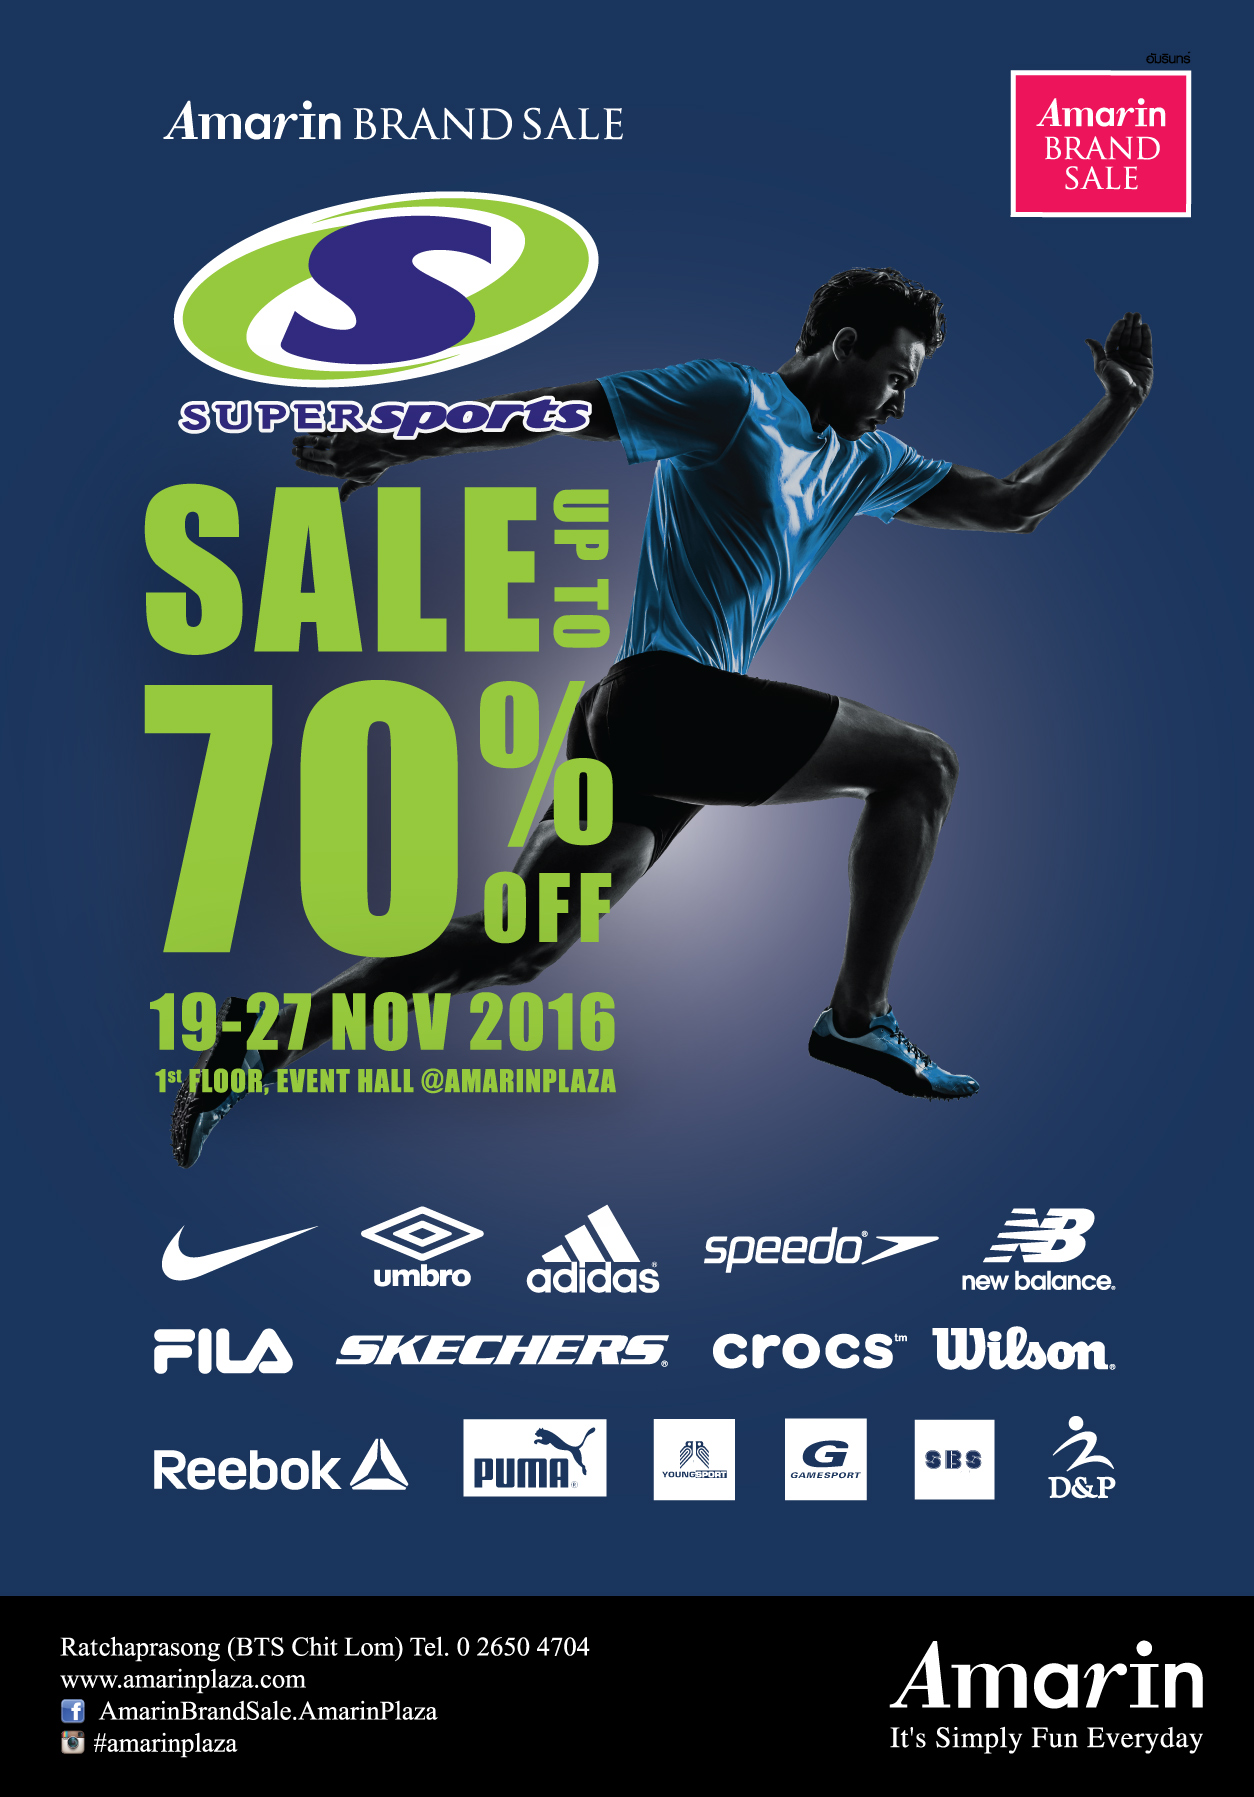 Amarin Brand Sale: SuperSports Sale Up to 70%